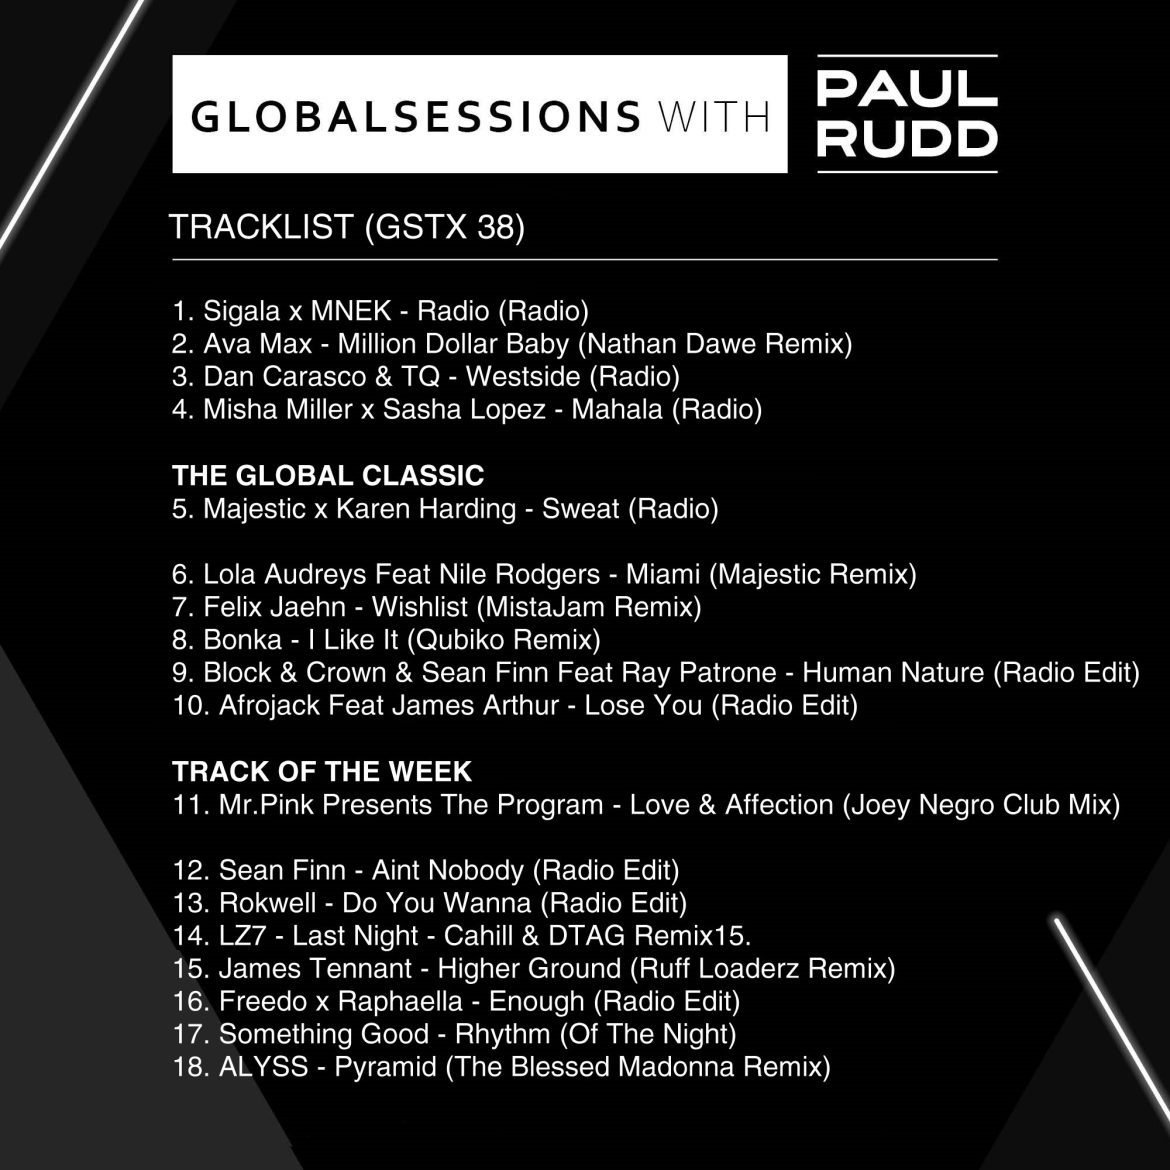 Playlist Globalsessionens with Paul Rudd.